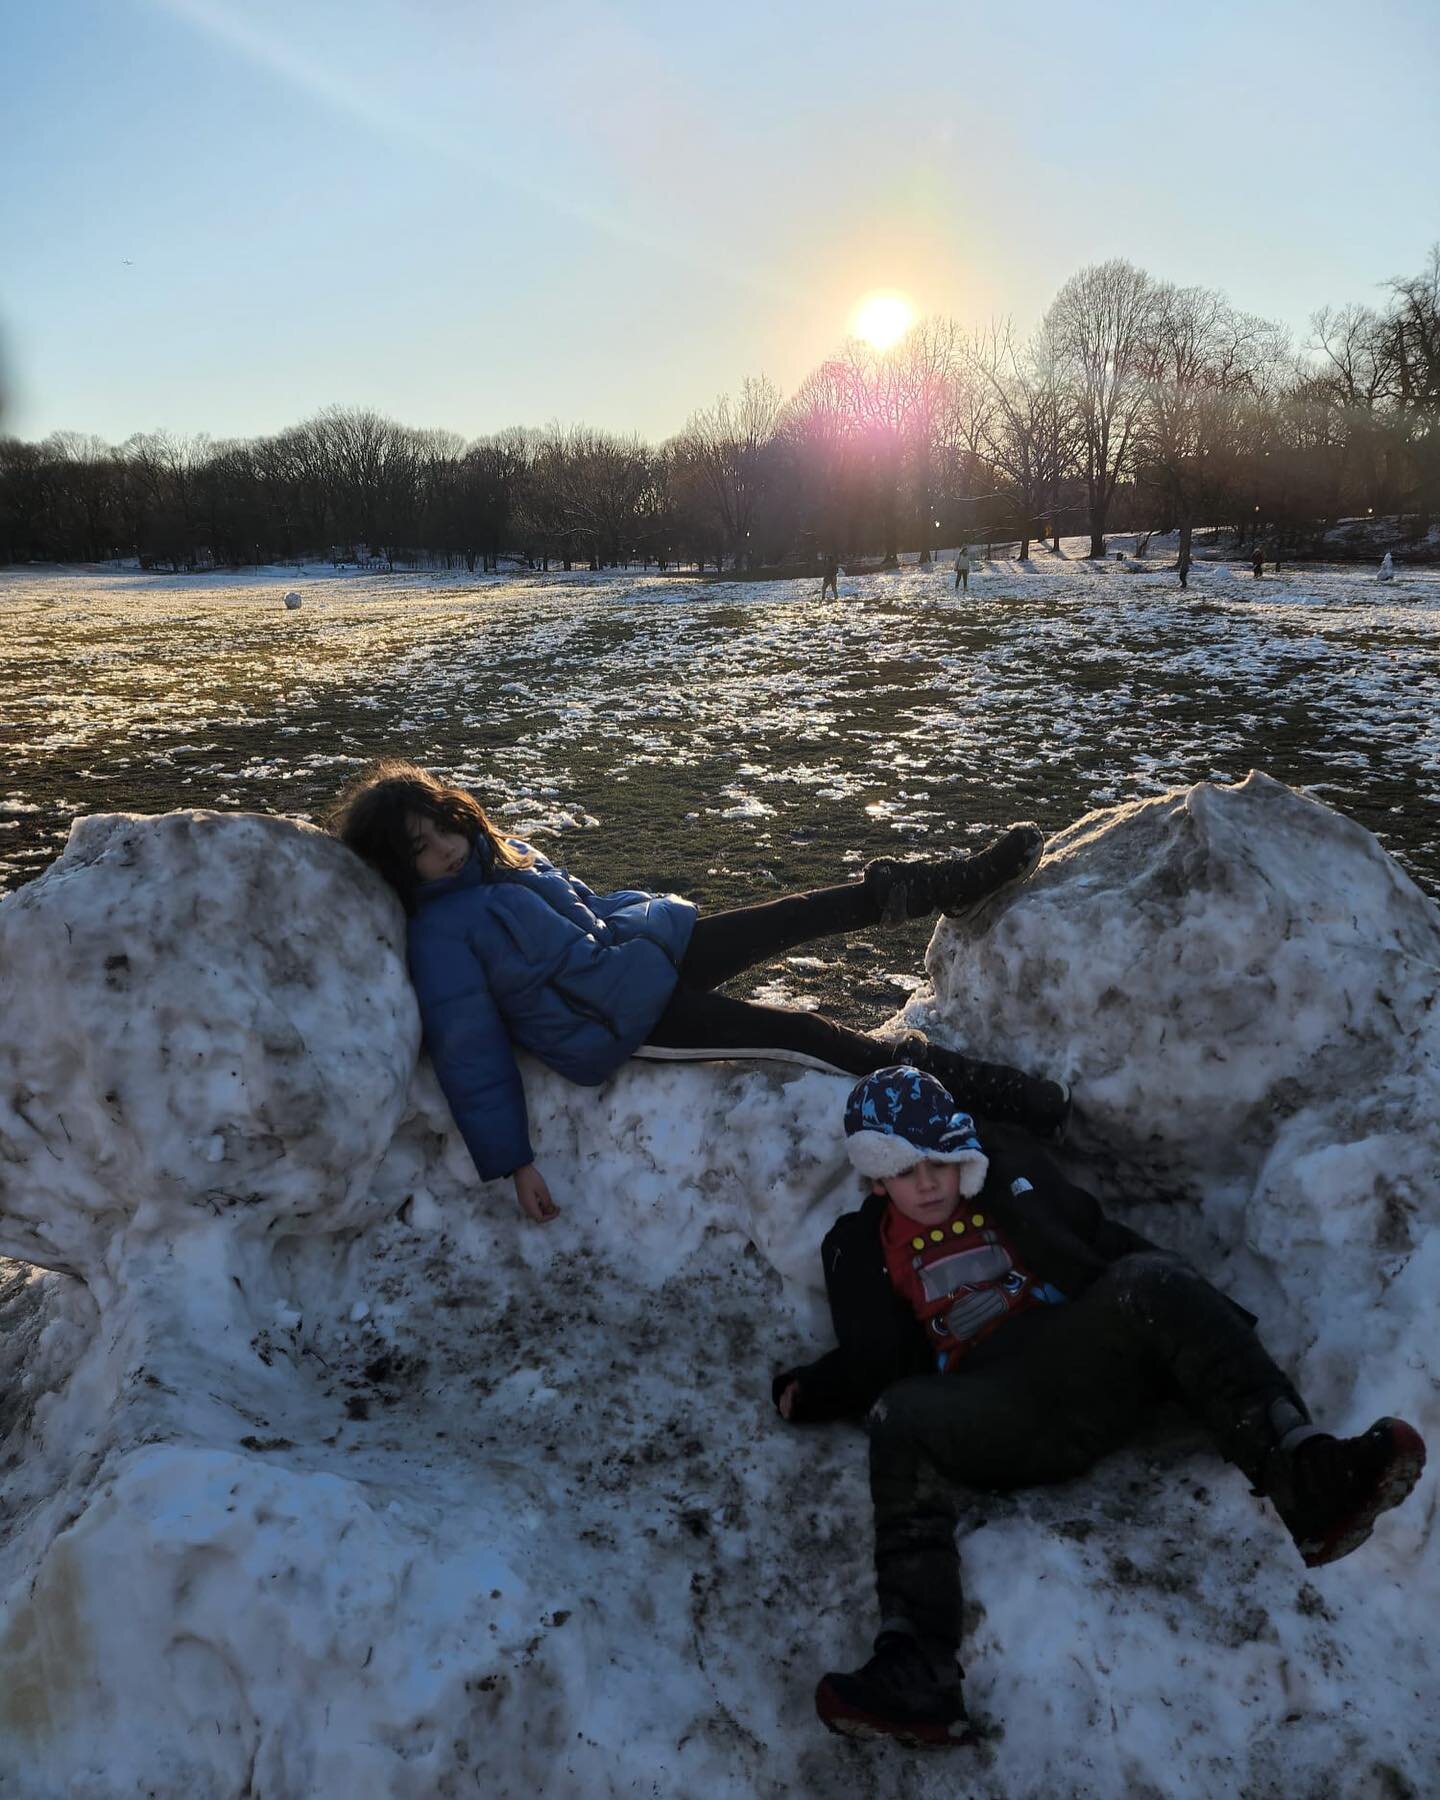 ☃️❄️Taking a nap with friends in a snow bed, fixing some melting snowmen and working together to build on an igloo we found in the park was  so fun during our winter after-school session on Wednesday.

It&rsquo;s not too late to sign up for our Monda